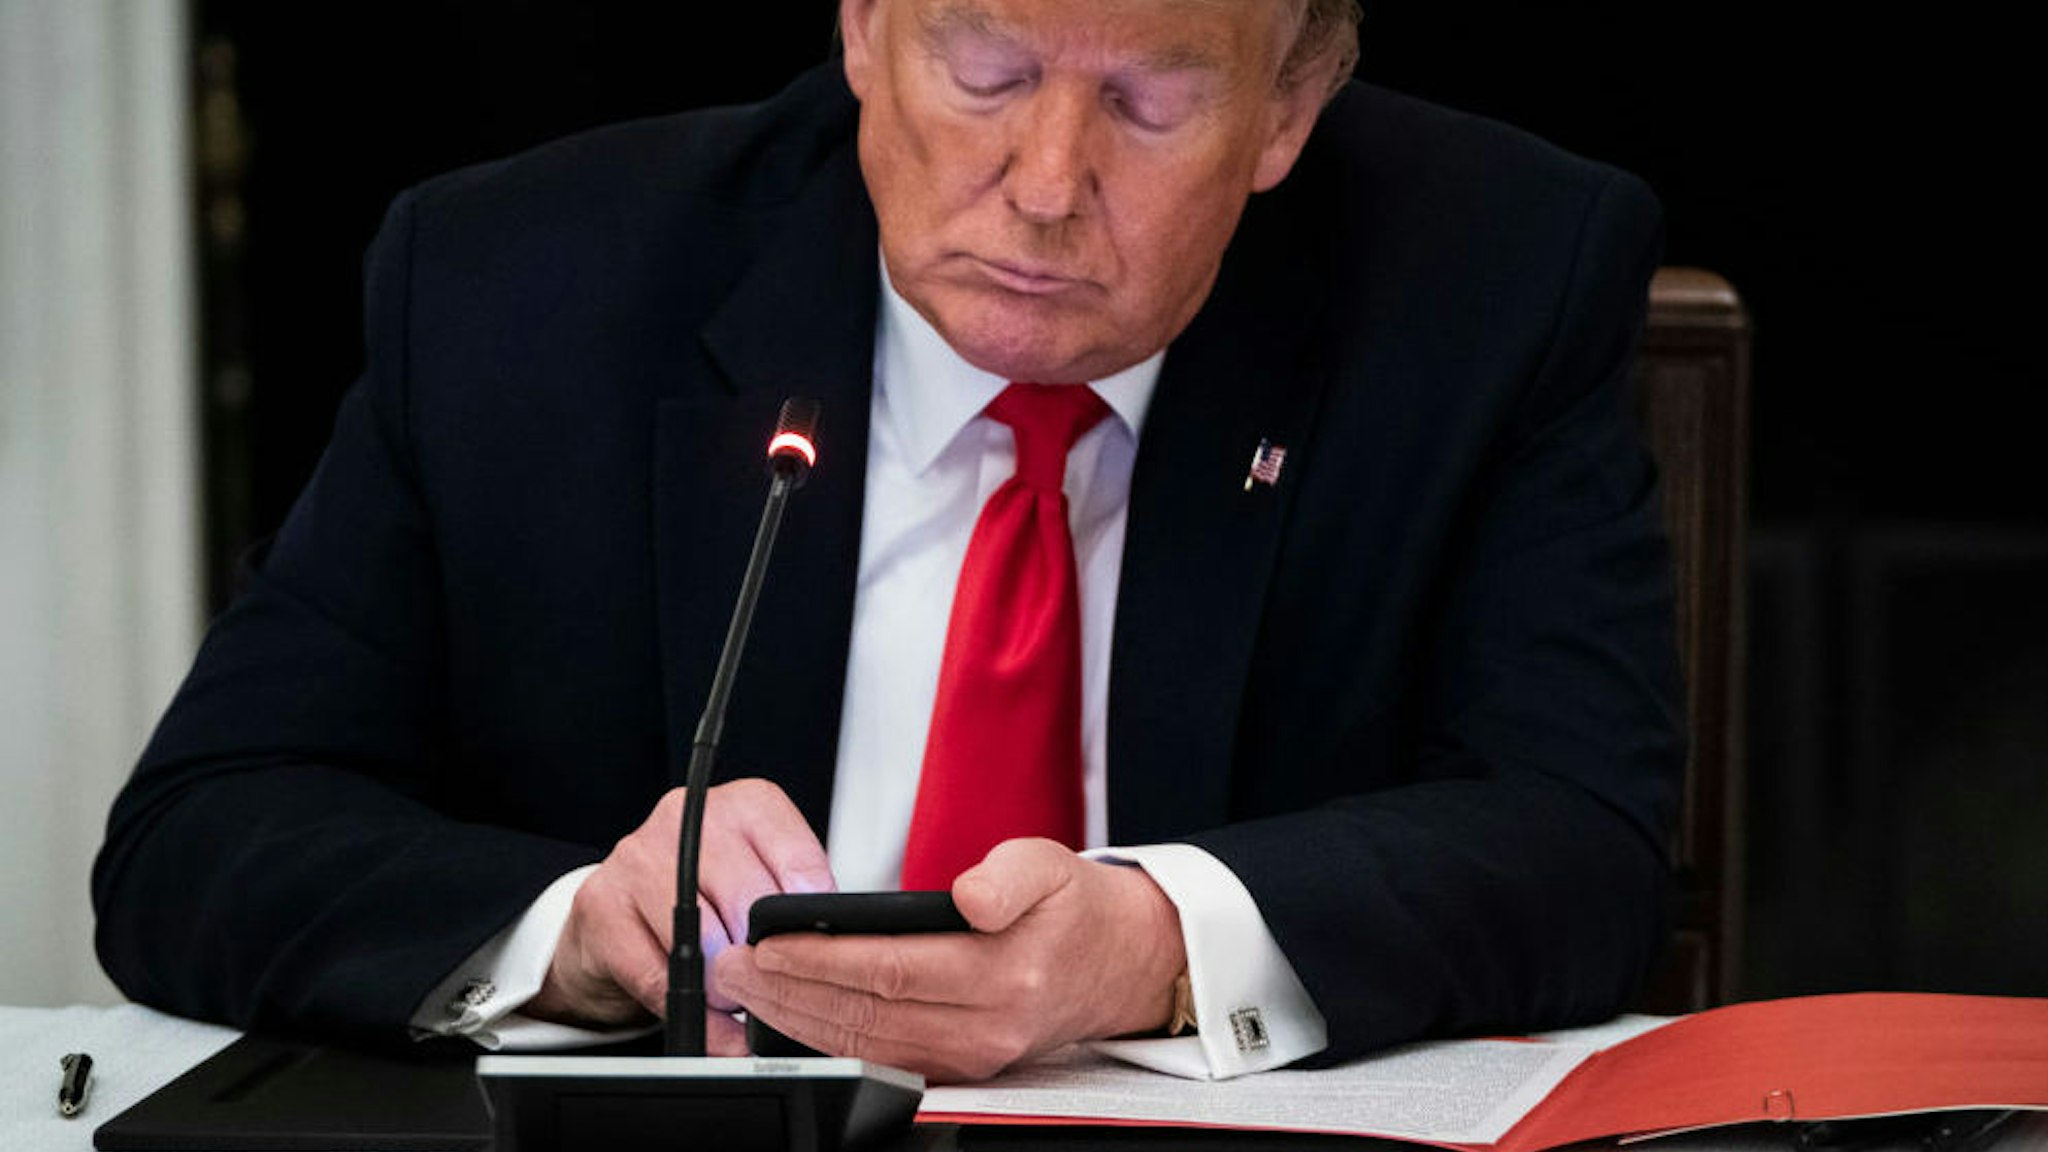 WASHINGTON, DC - JUNE 18: President Donald J. Trump uses his cellphone as he participates in a roundtable discussion with Governors and small business owners on the reopening of Americas small businesses in the State Dinning Room at the White House on Thursday, June 18, 2020 in Washington, DC.